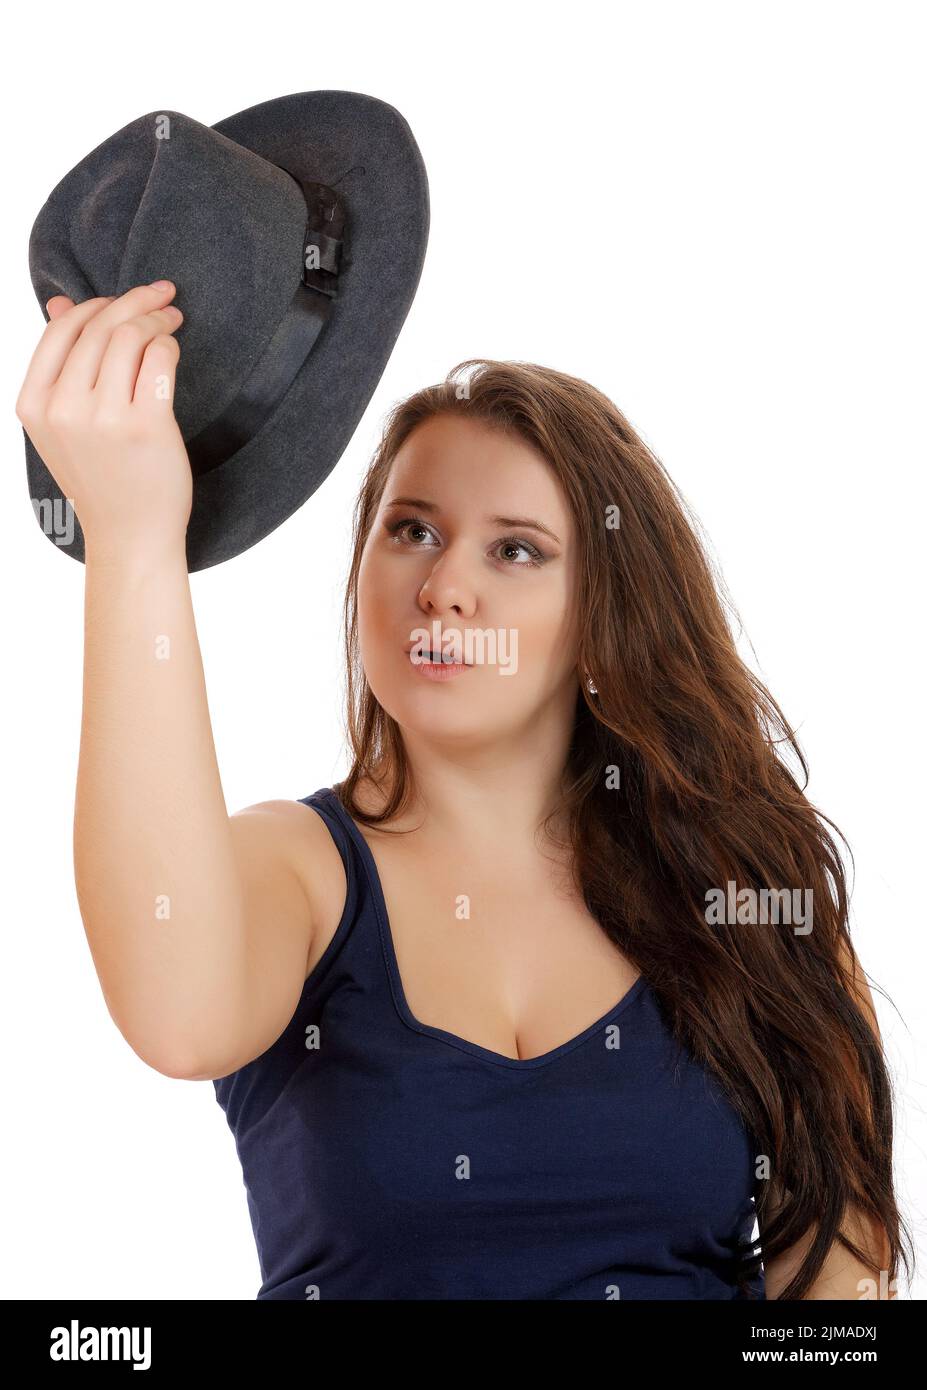 The girl looks surprised at the hat in her hand on a white background Stock Photo